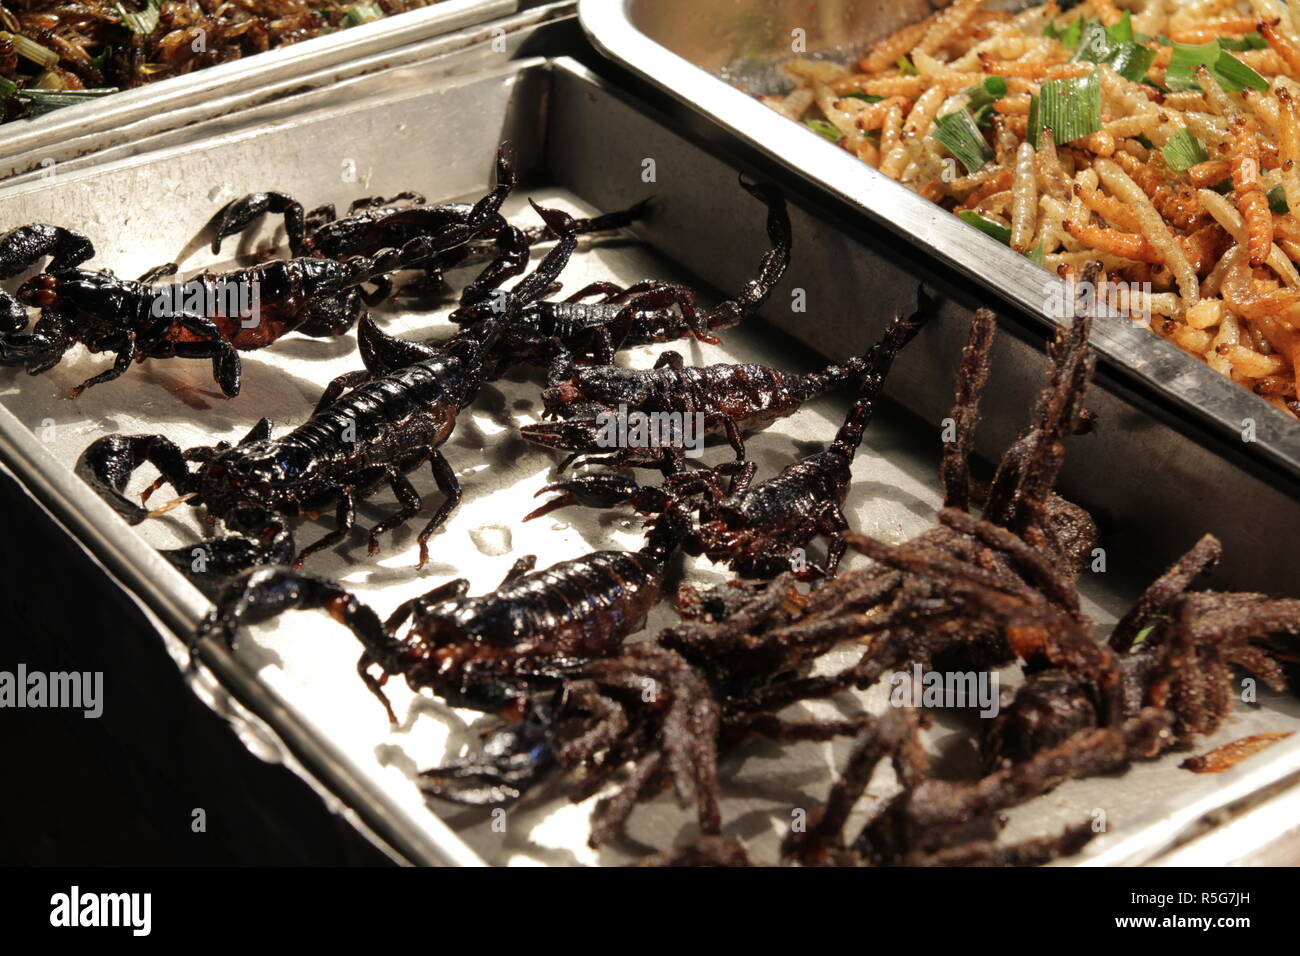 Roasted black scorpions, spiders and other insects at a street vendor in Khao San road, Bangkok, Thailand Stock Photo